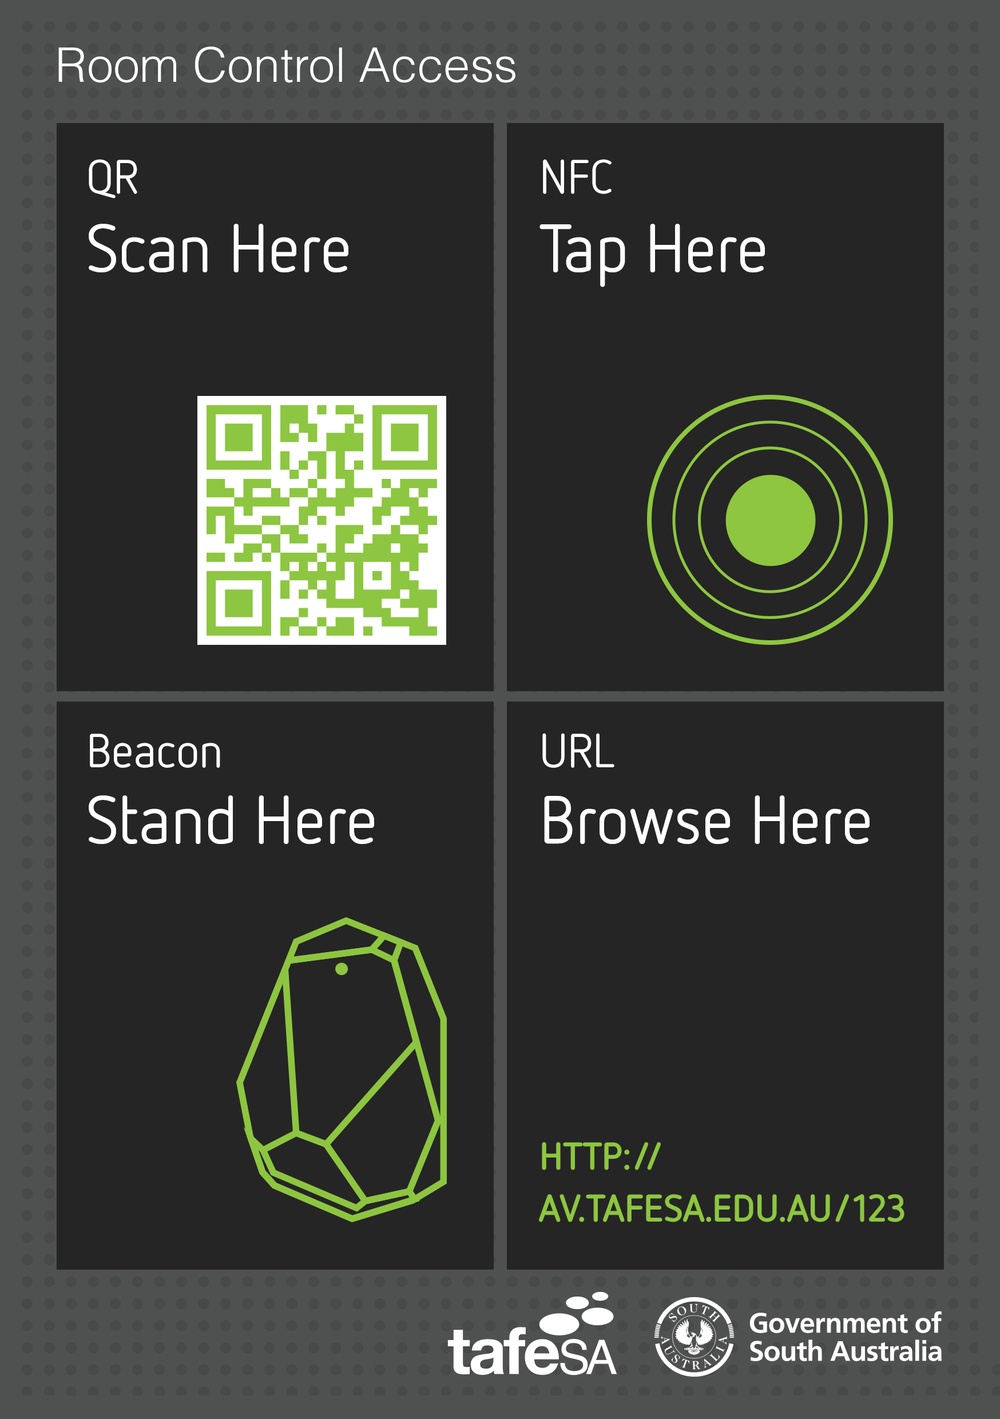 QR Codes, NFC chips, iBeacon and URLs can be used to launch the control interface on your customer's mobile device, tablet or laptop.